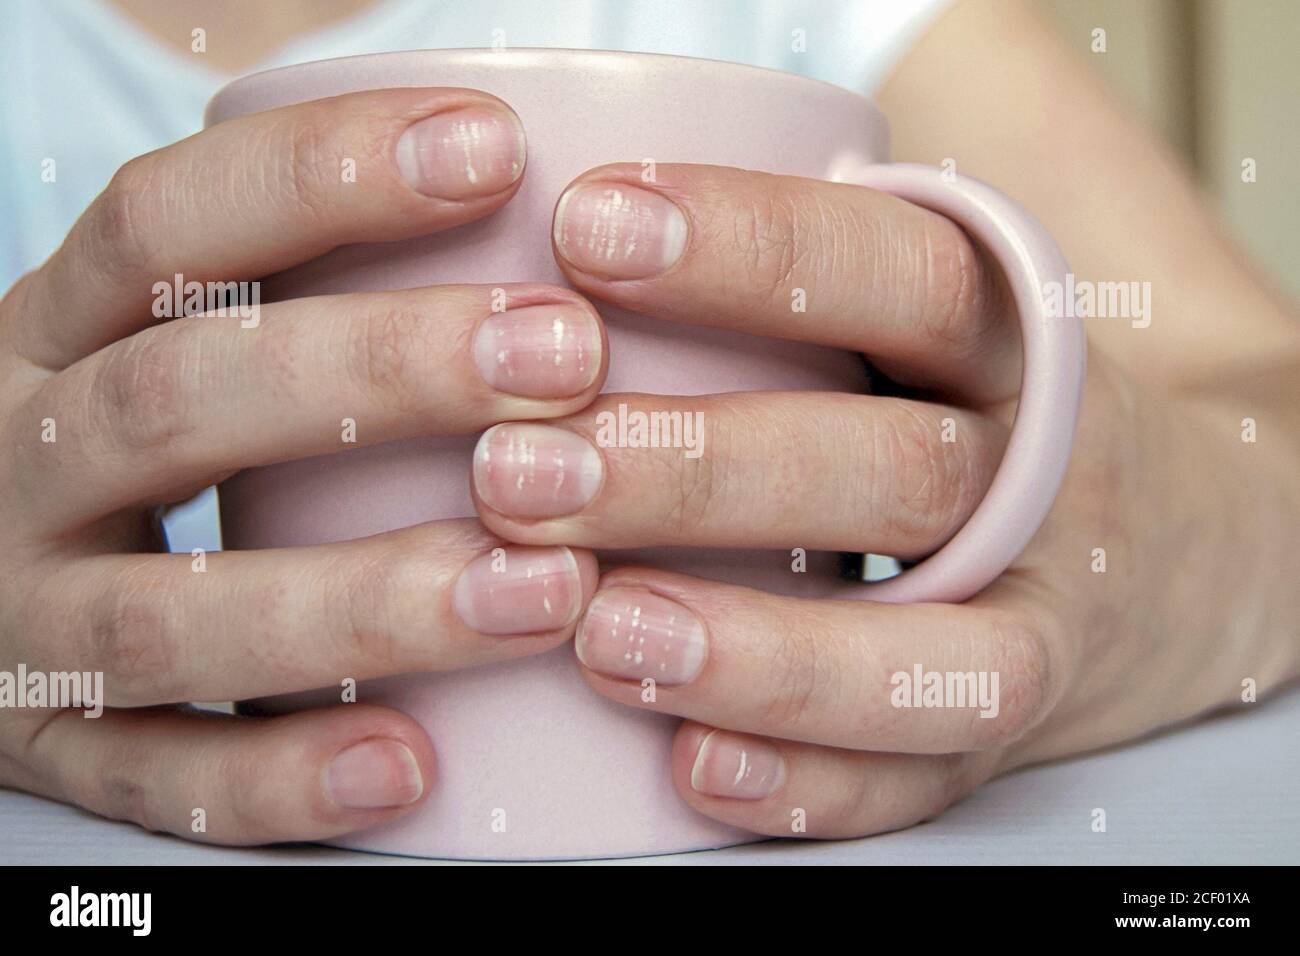 What do healthy nails look like?